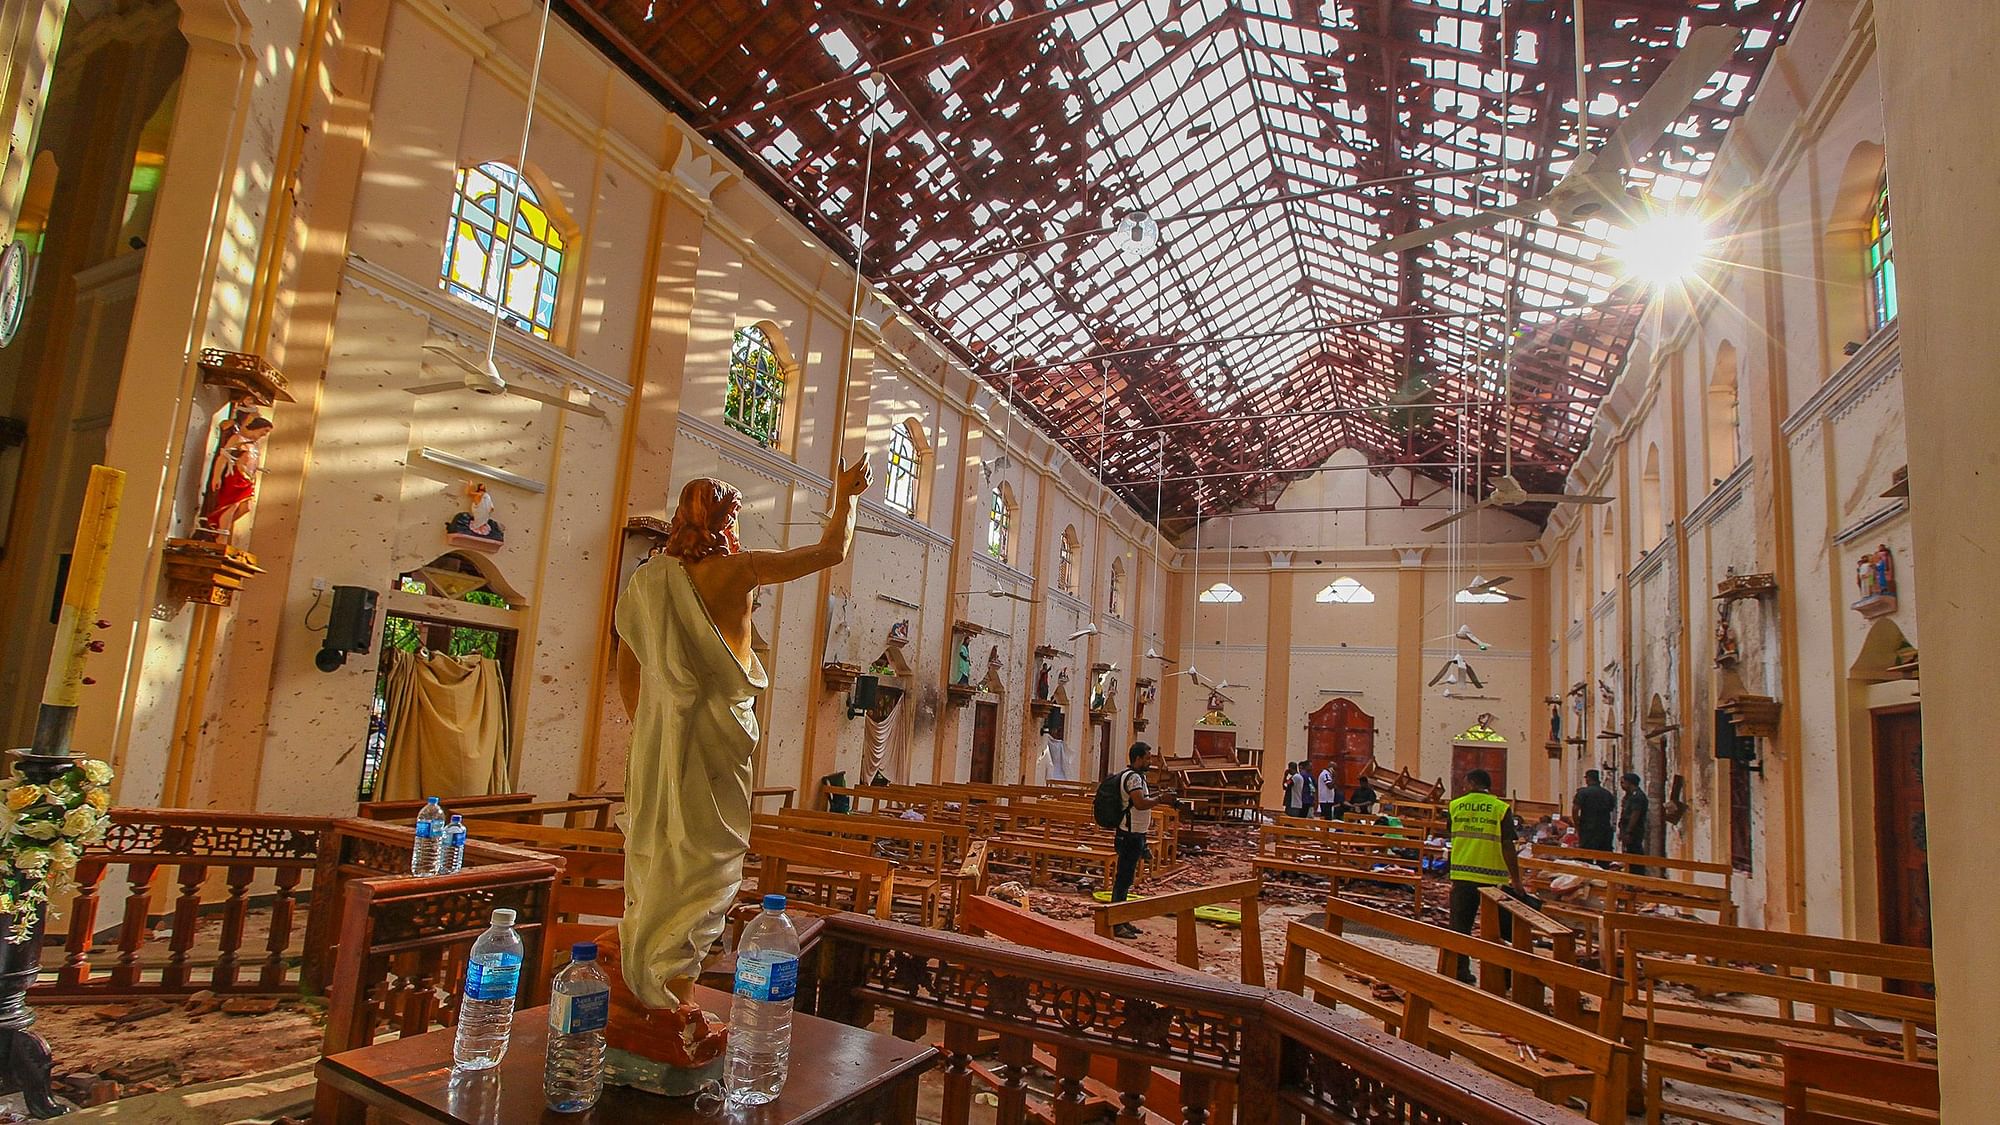 The Islamic State had claimed responsibility for a series of devastating suicide attacks that had killed 359 people in Sri Lanka.